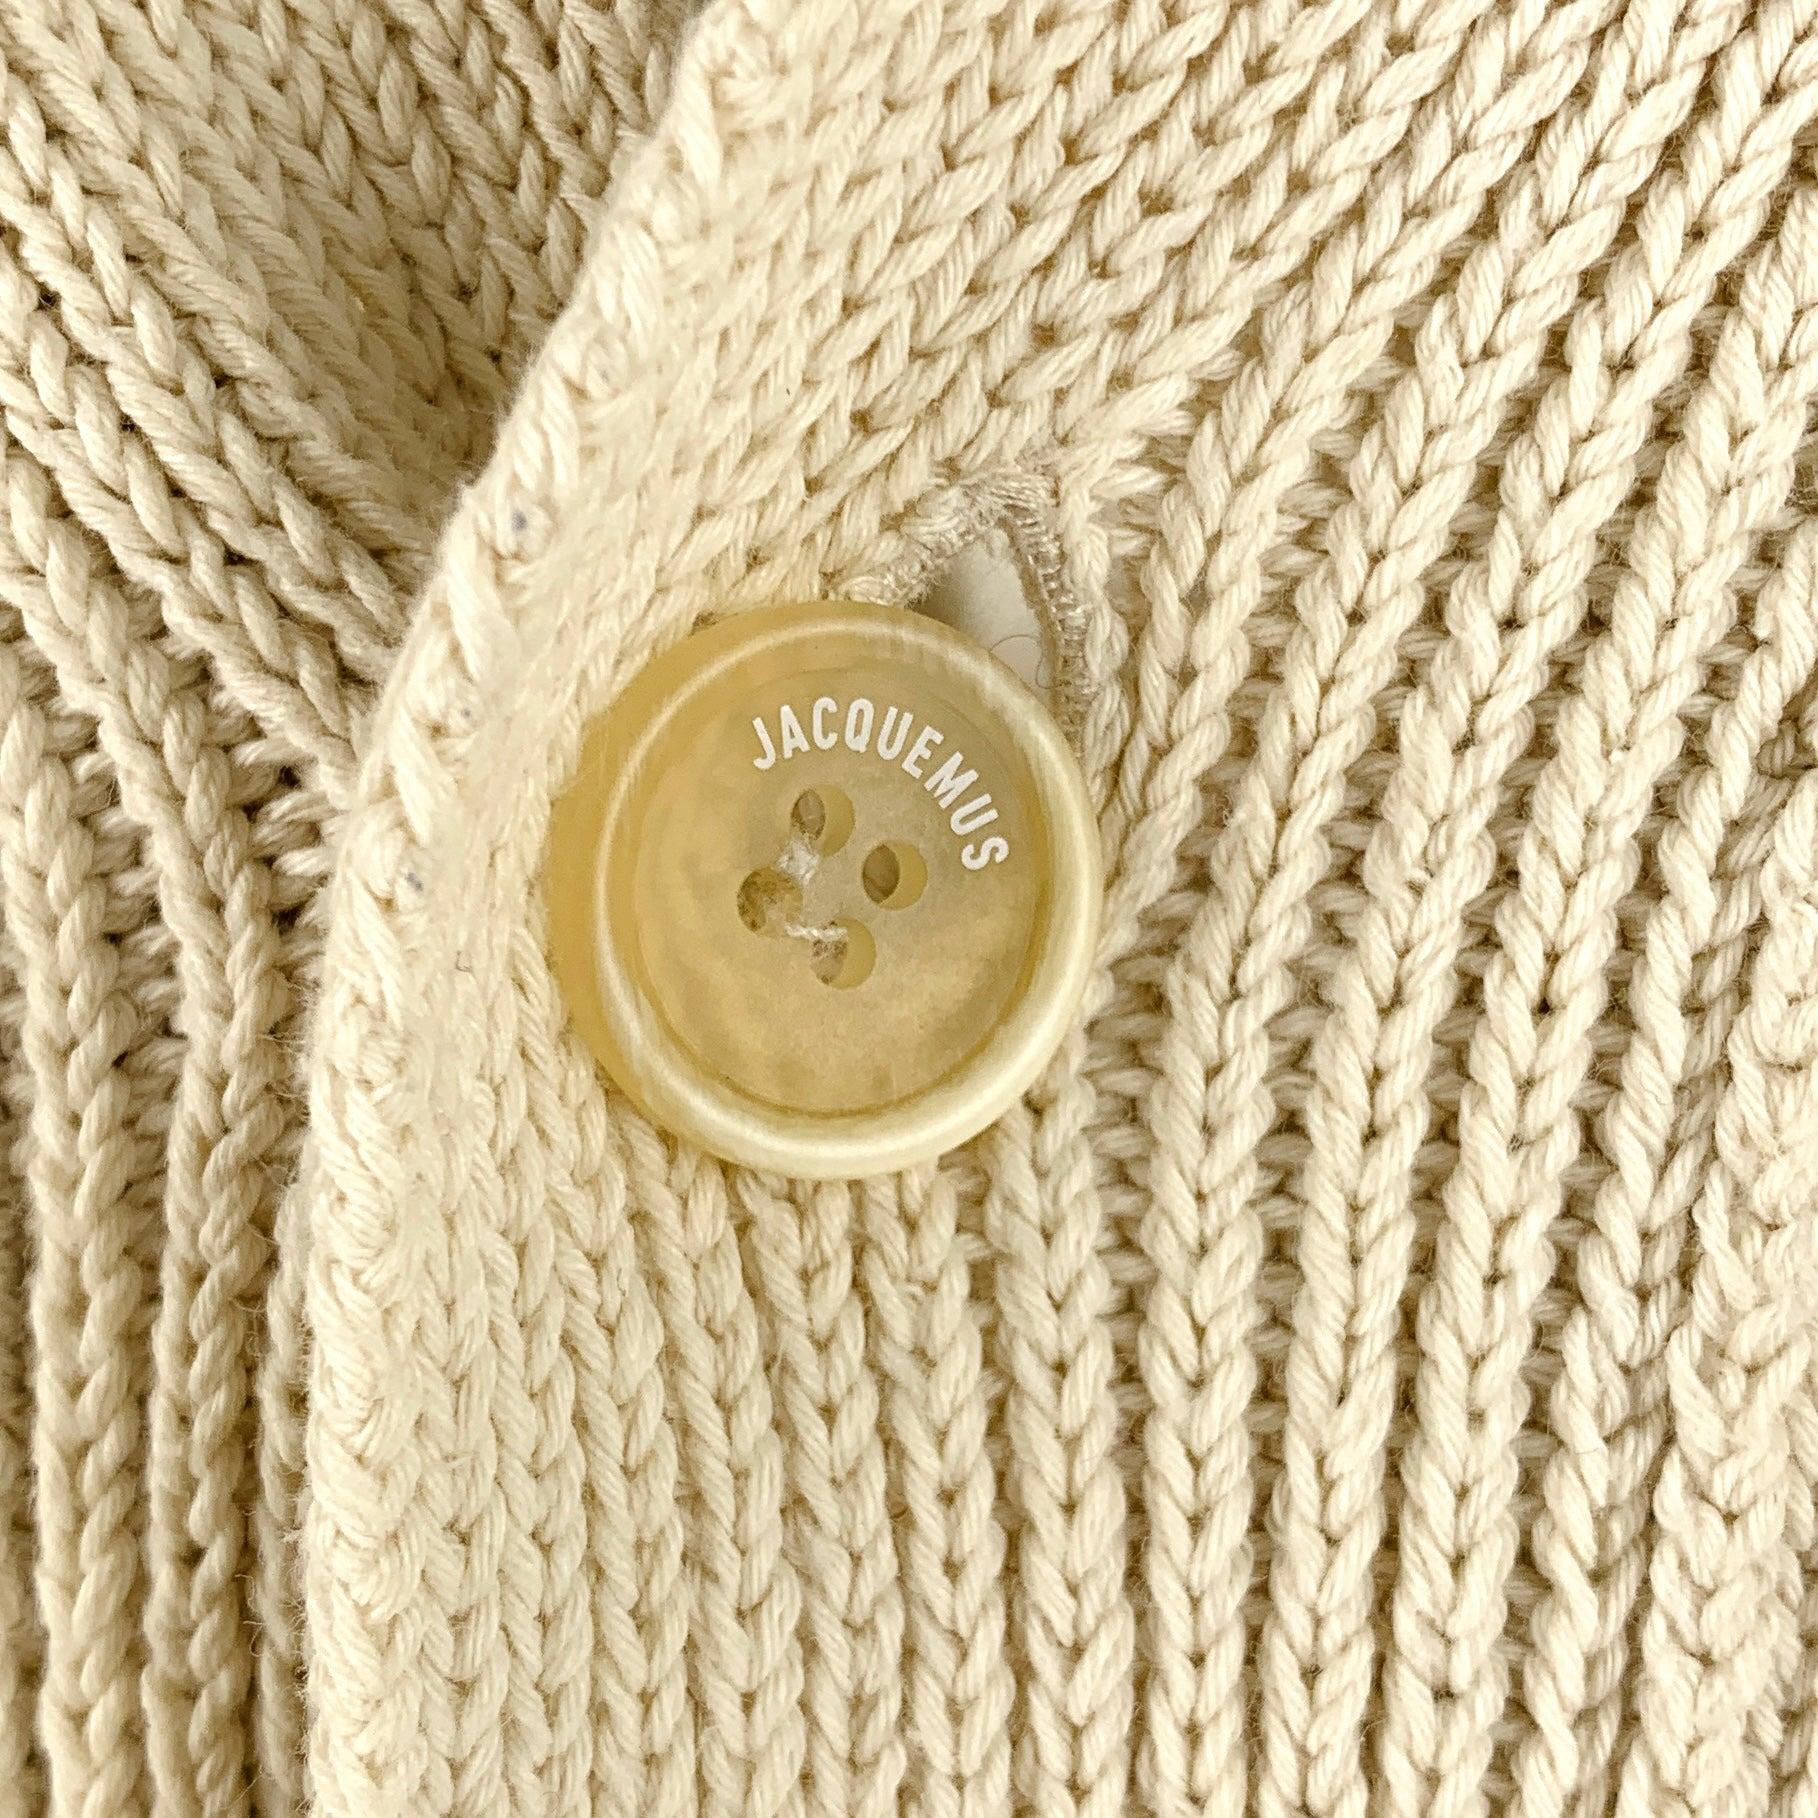 JACQUEMUS cardigan
in a cream cotton blend knit featuring an oversized style, rib knit technique, yellow trim, and button closure. Made in Italy.Very Good Pre-Owned Condition. Minor marks. 

Marked:   XL 

Measurements: 
 
Shoulder: 20 inches Chest: